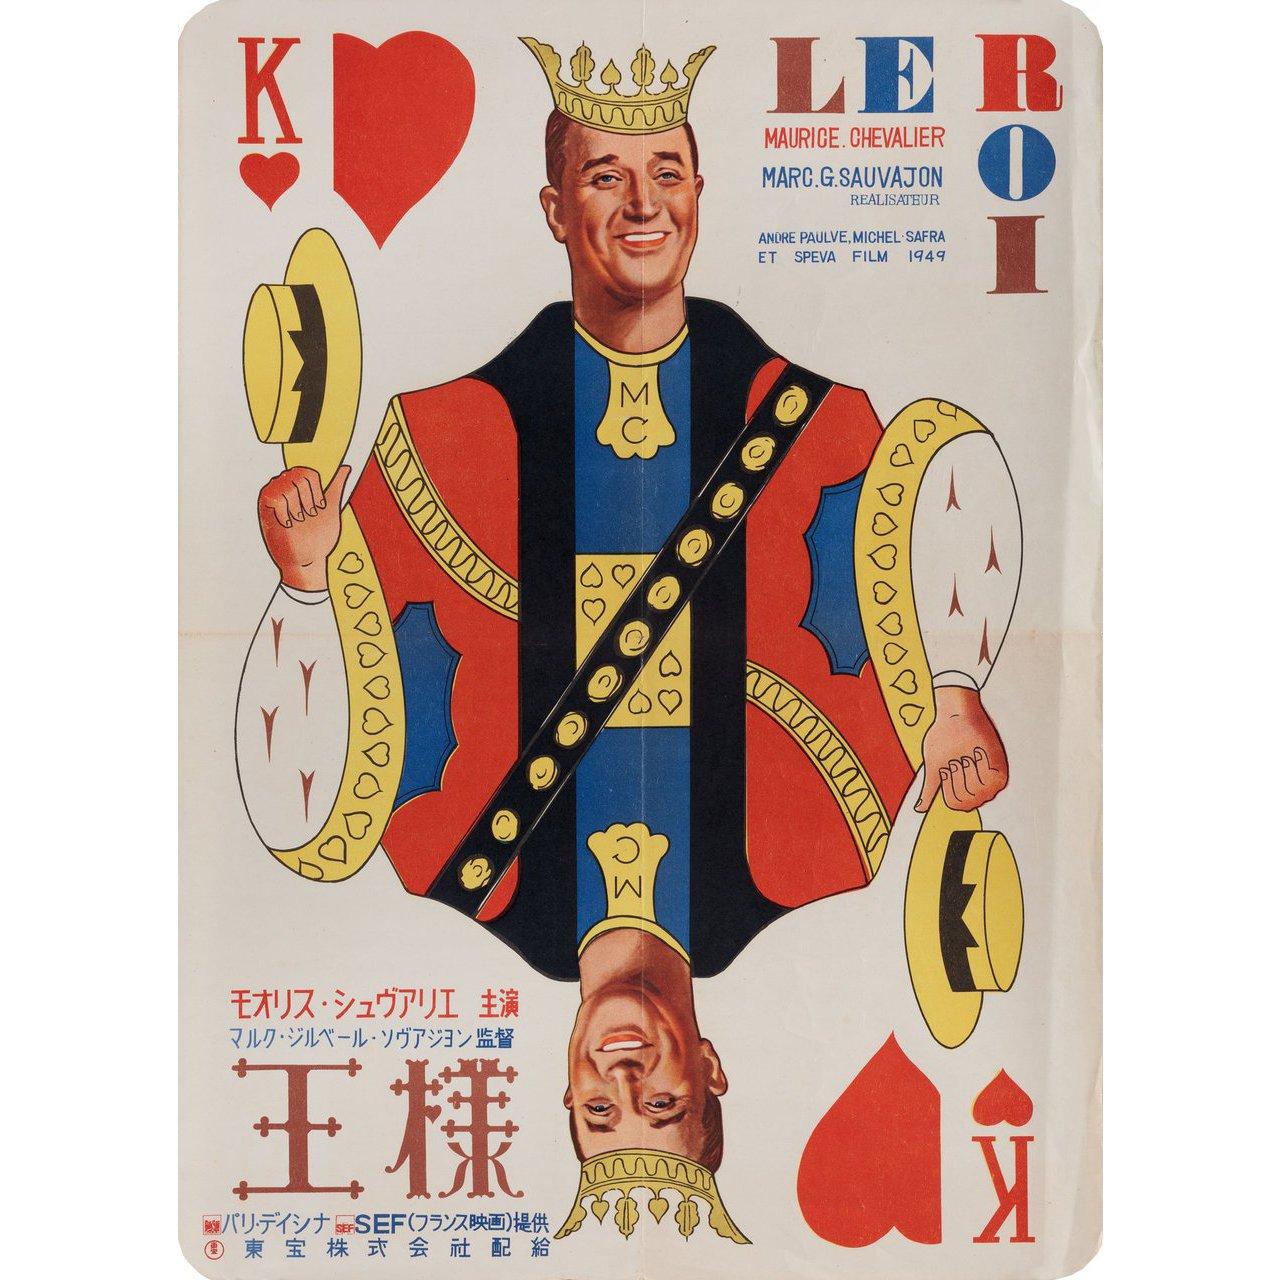 Original 1949 Japanese B3 poster for the film A Royal Affair (Le roi) directed by Marc-Gilbert Sauvajon with Maurice Chevalier / Annie Ducaux / Sophie Desmarets. Very Good condition, folded. Many original posters were issued folded or were